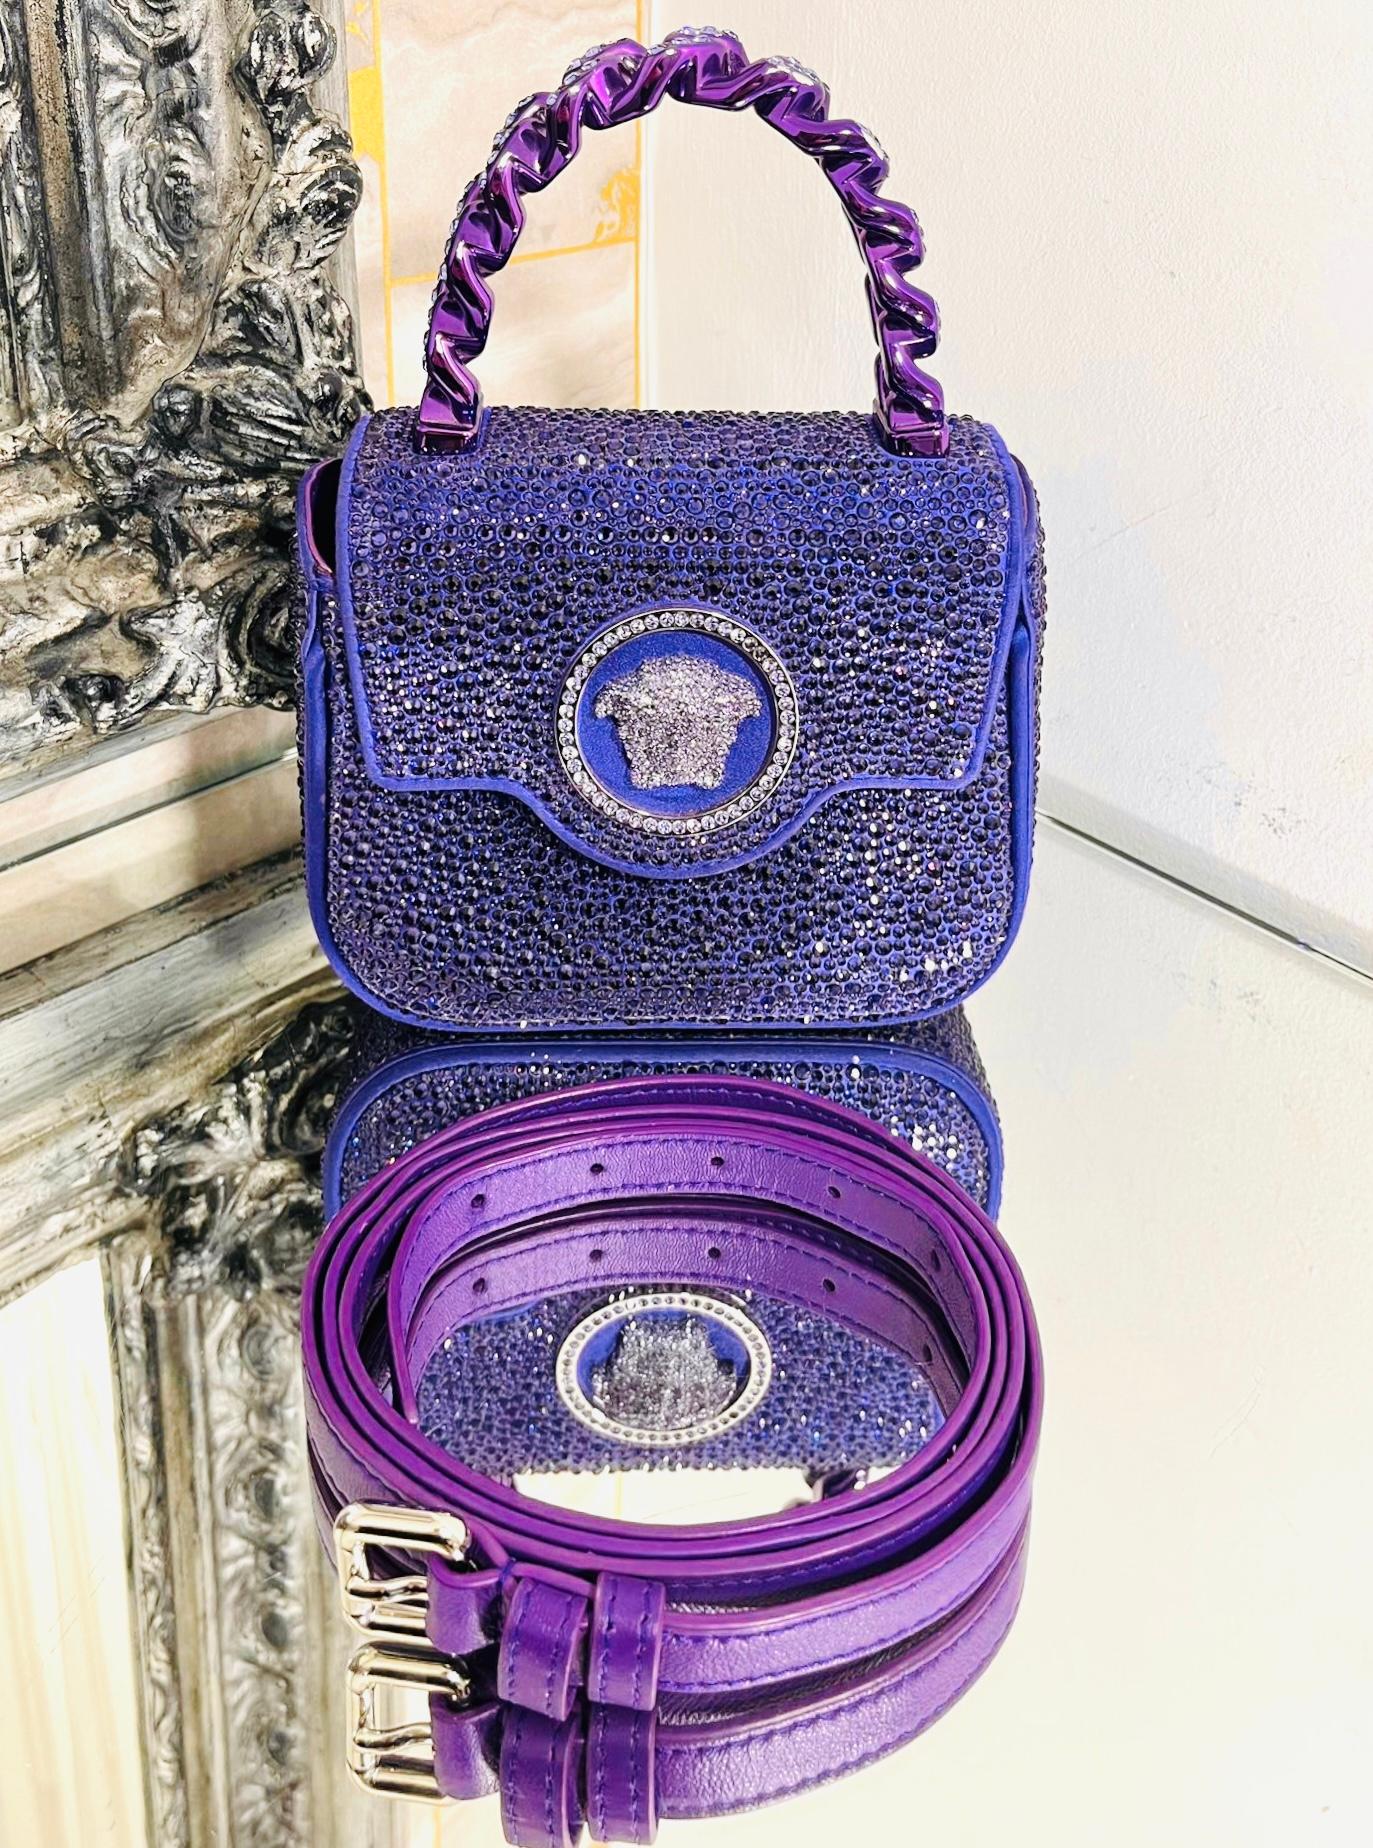 Versace Mini Crystal Studded Medusa Bag

Purple top handle carry hand bag with cross body leather strap.

Fully adorned with crystal embellishment throughout. Signature crystal Medusa

head to the centre. Featuring solid metallic purple chunky chain